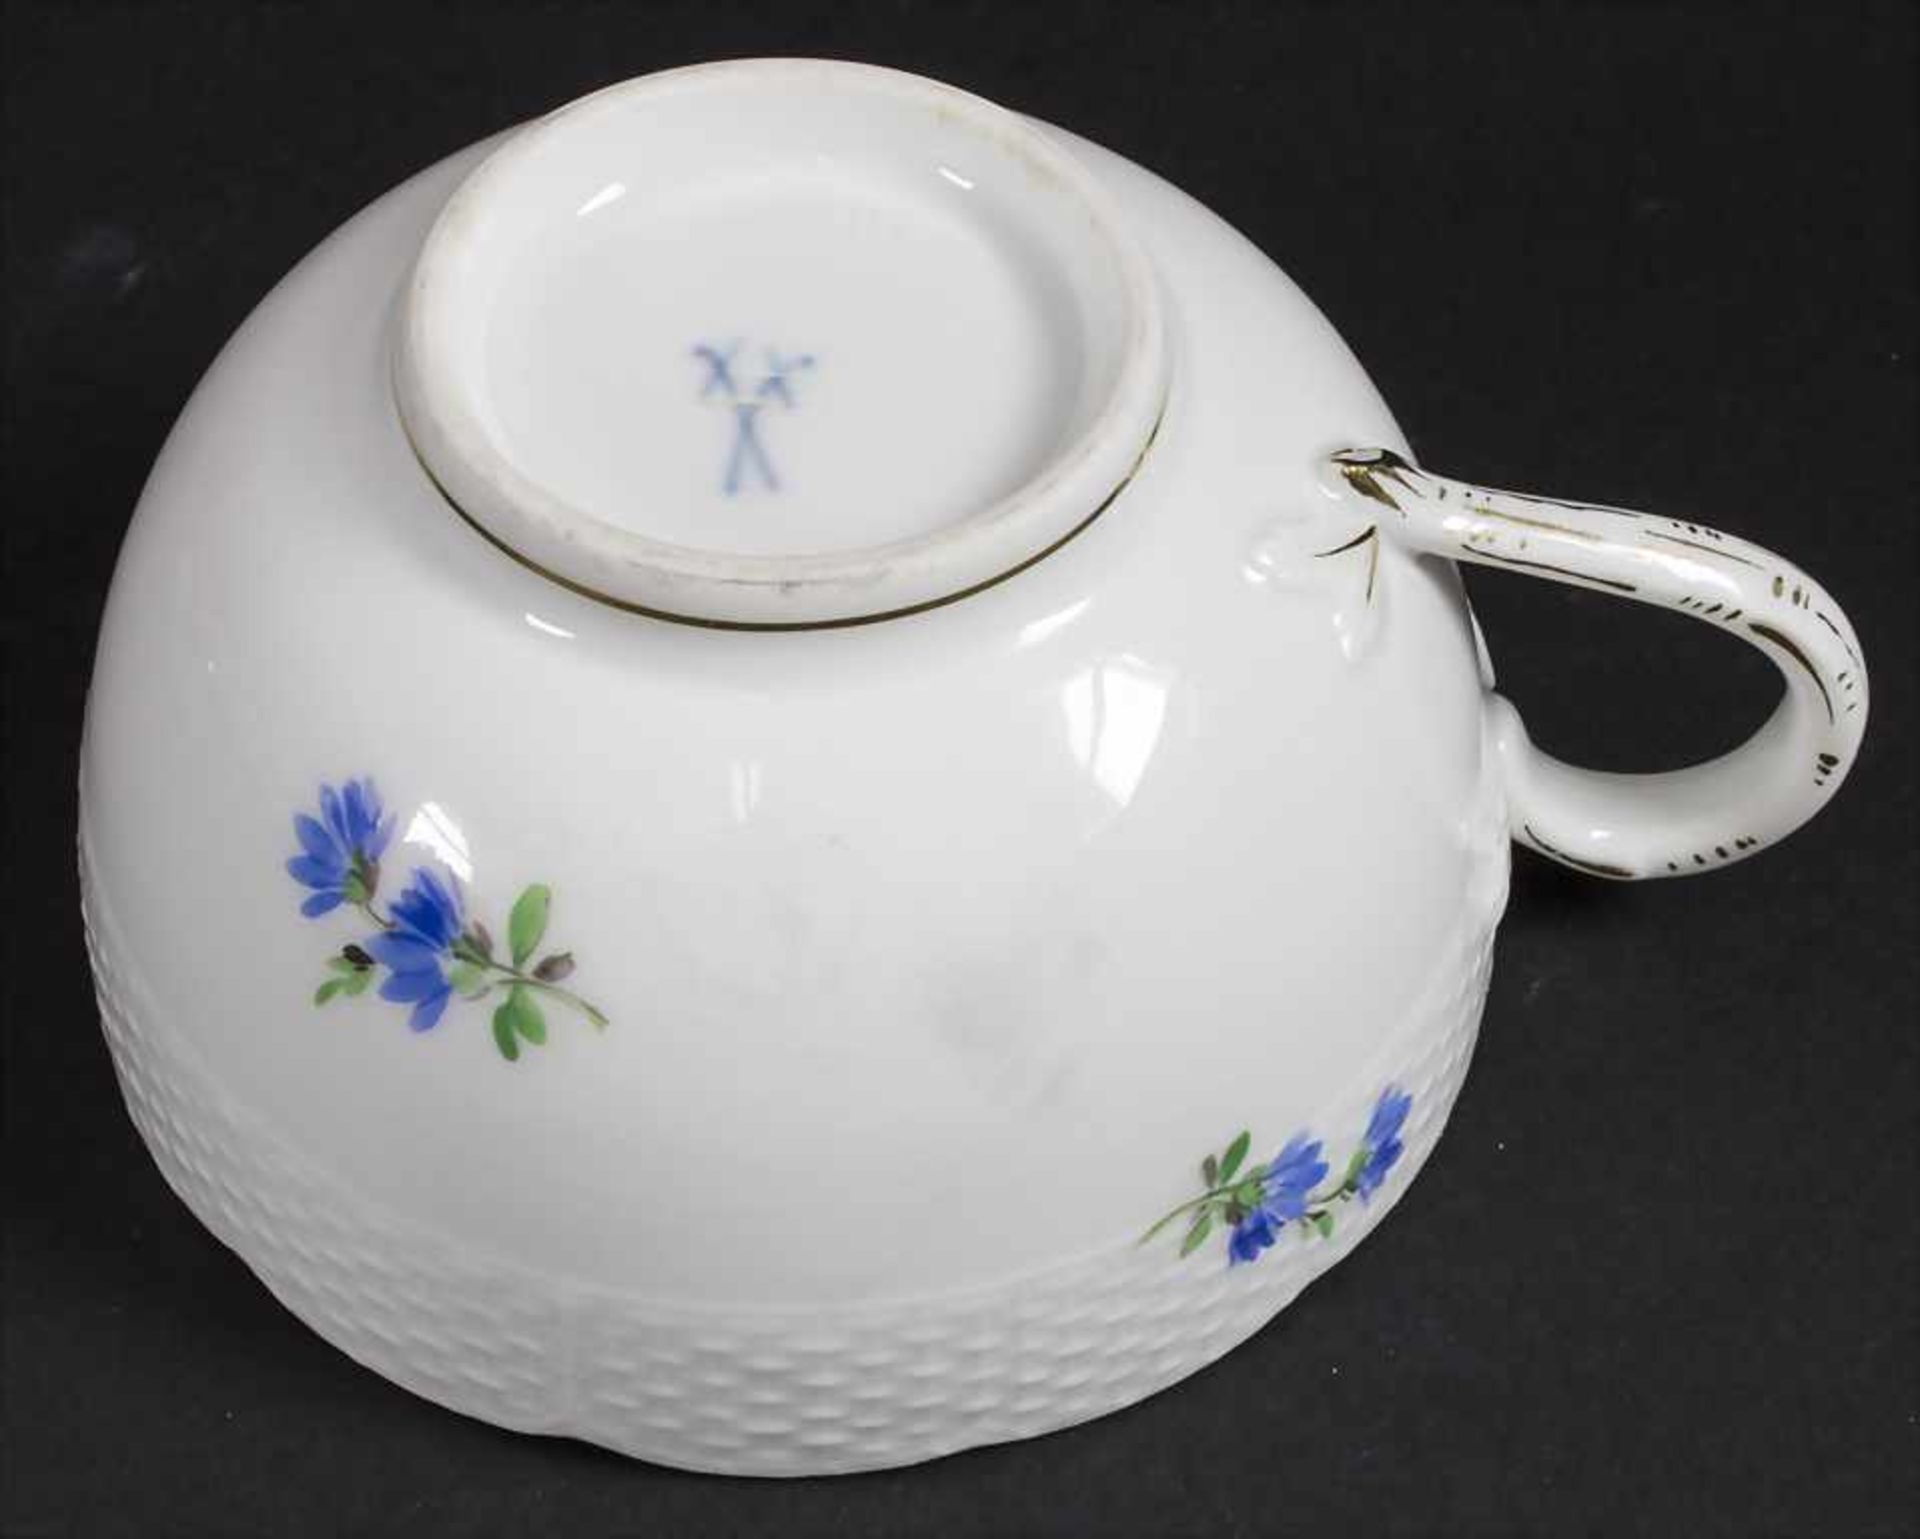 Gedeck mit Blumenmalerei / A place setting with flowers, Meissen, nach 1934 - Image 3 of 12